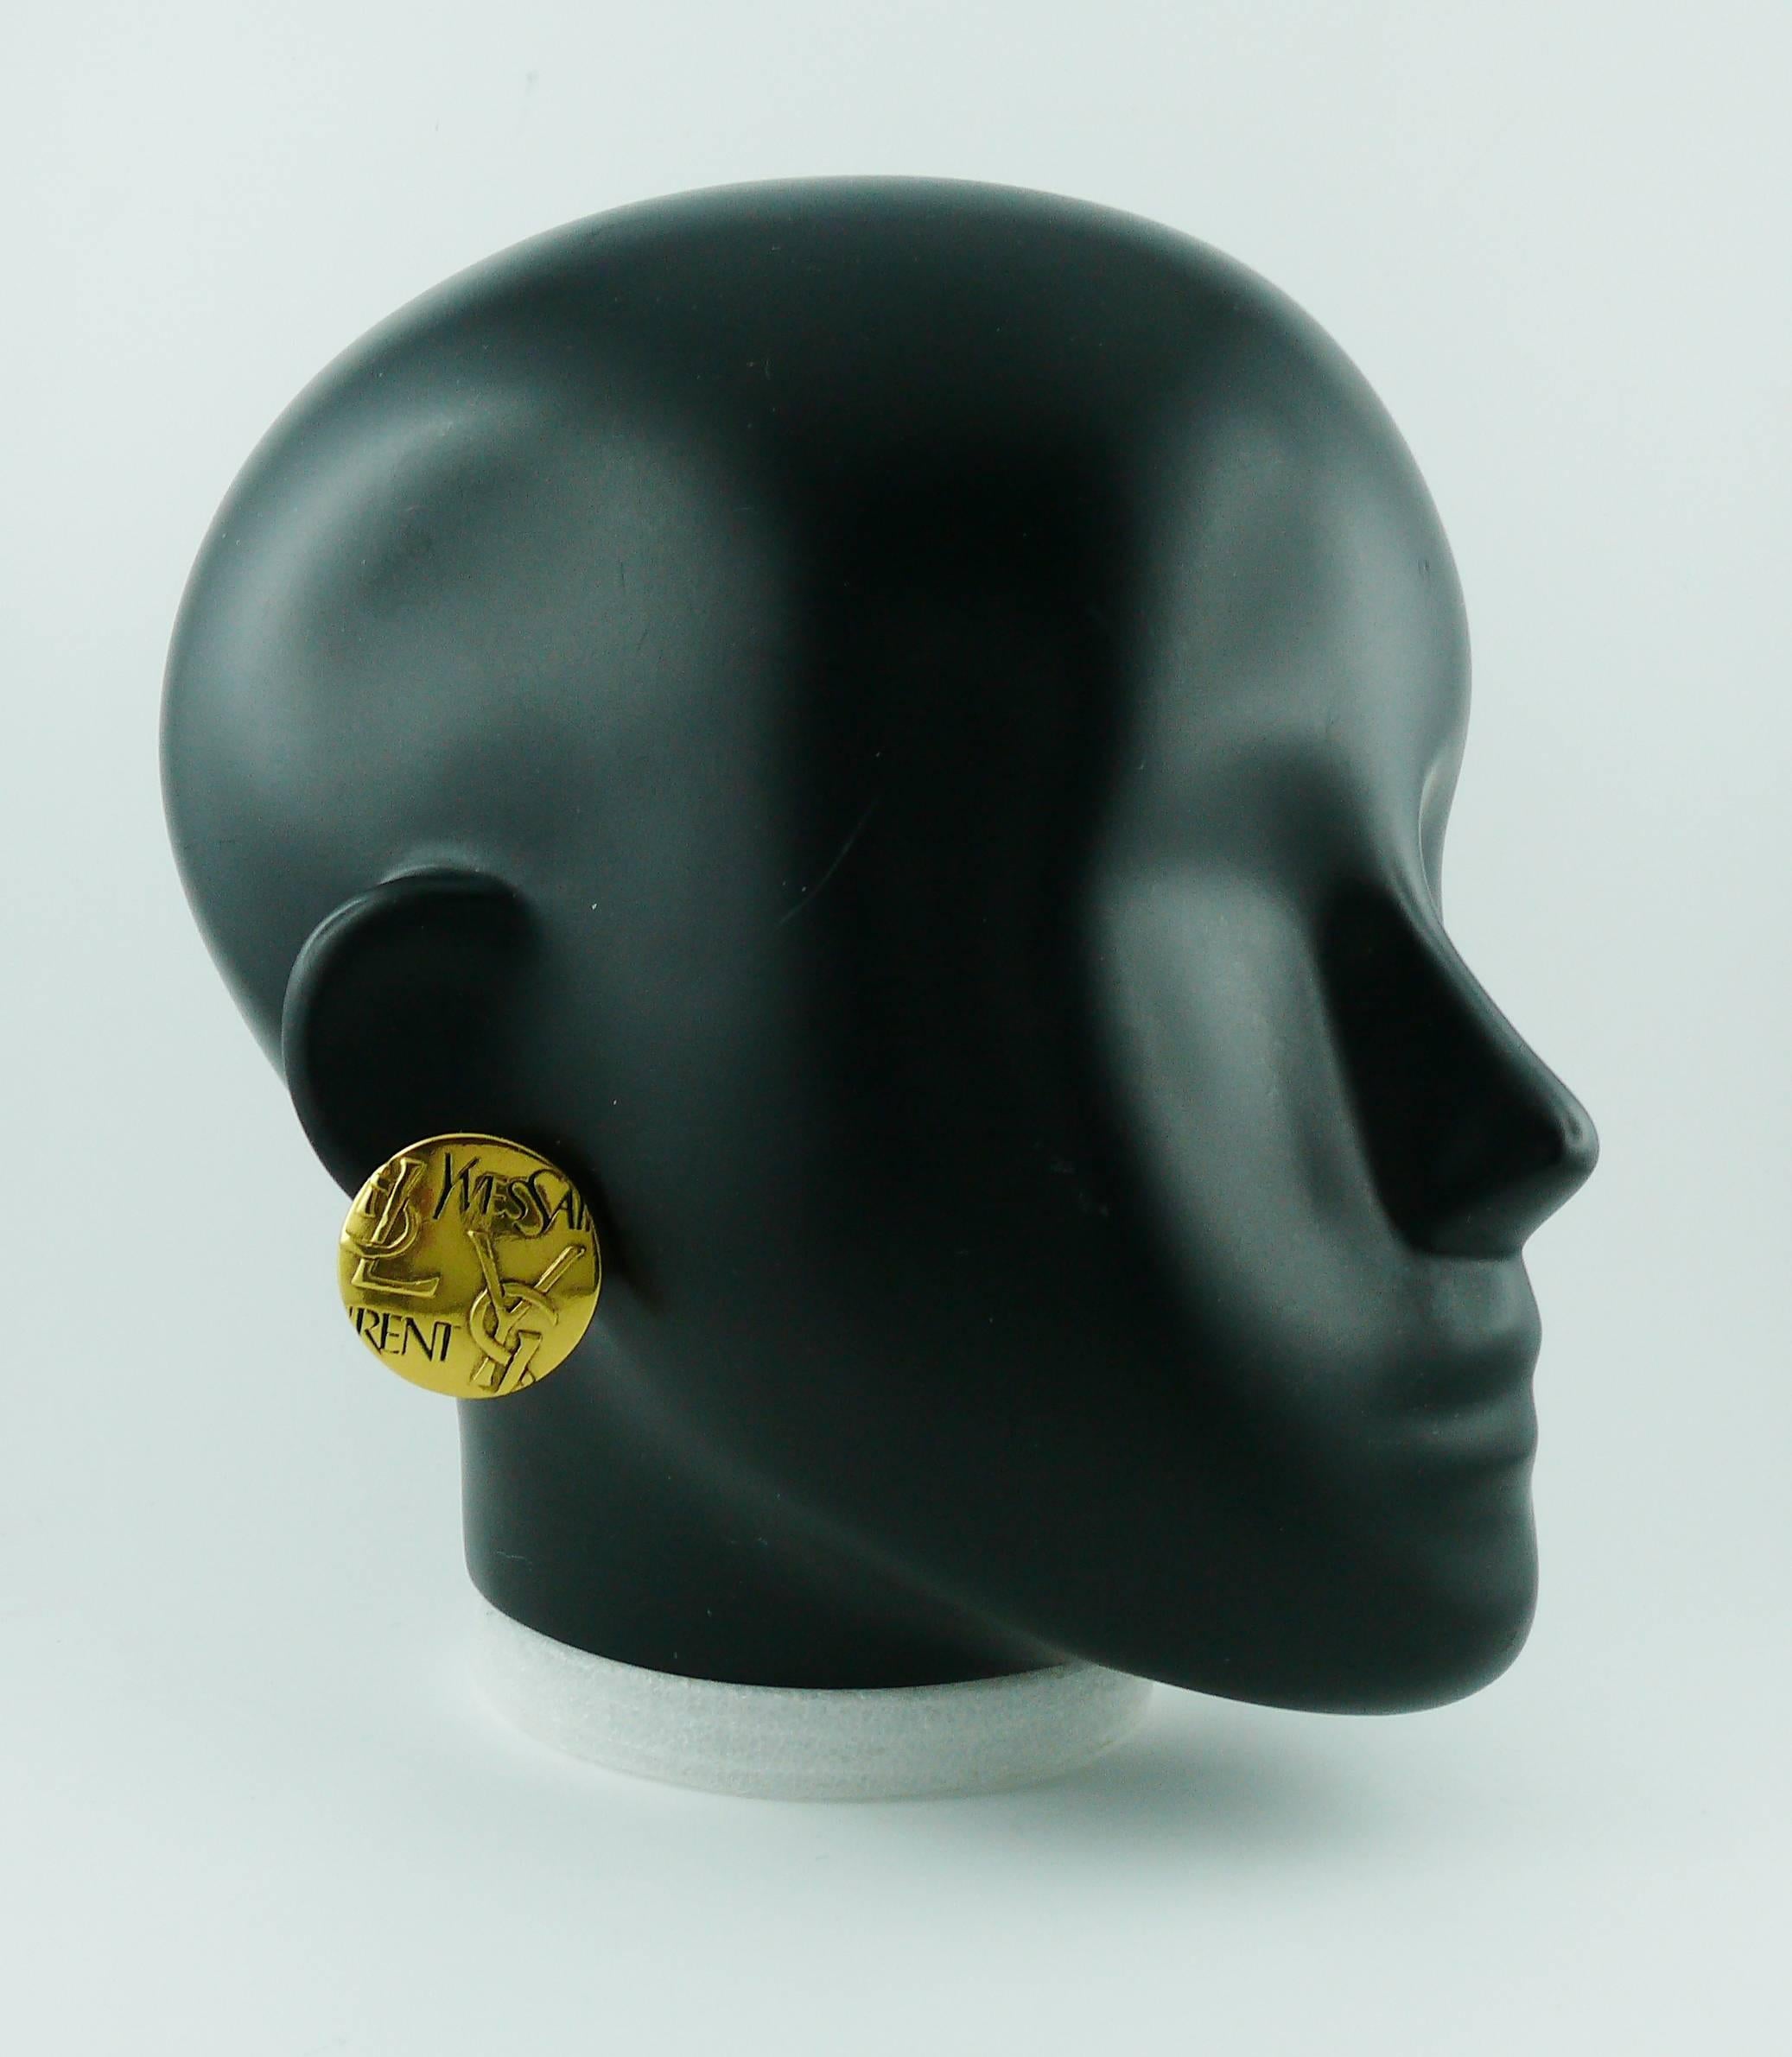 YVES SAINT LAURENT vintage iconic gold toned signature clip-on earrings.

Embossed YSL Made in France.

Indicative measurements : diameter approx. 3 cm (1.18 inches).

JEWELRY CONDITION CHART
- New or never worn : item is in pristine condition with